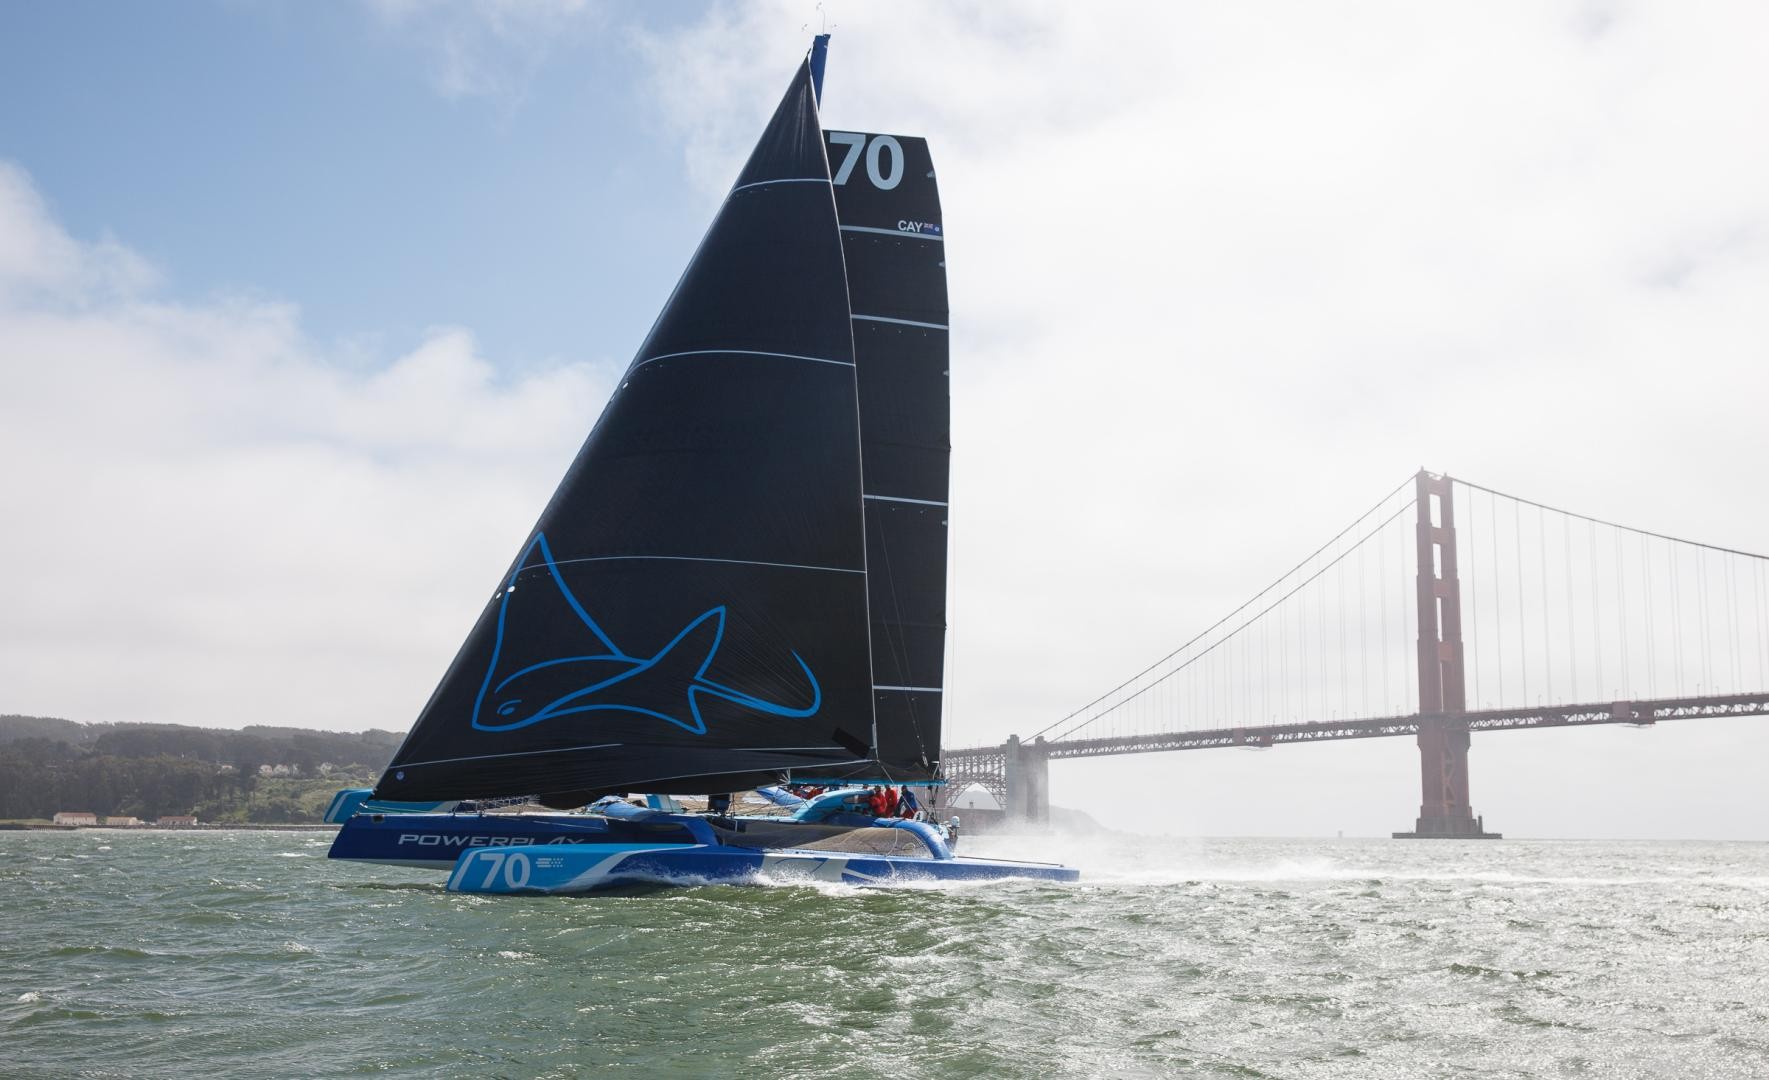 The MOD70 PowerPlay recently broke two ocean racing records.